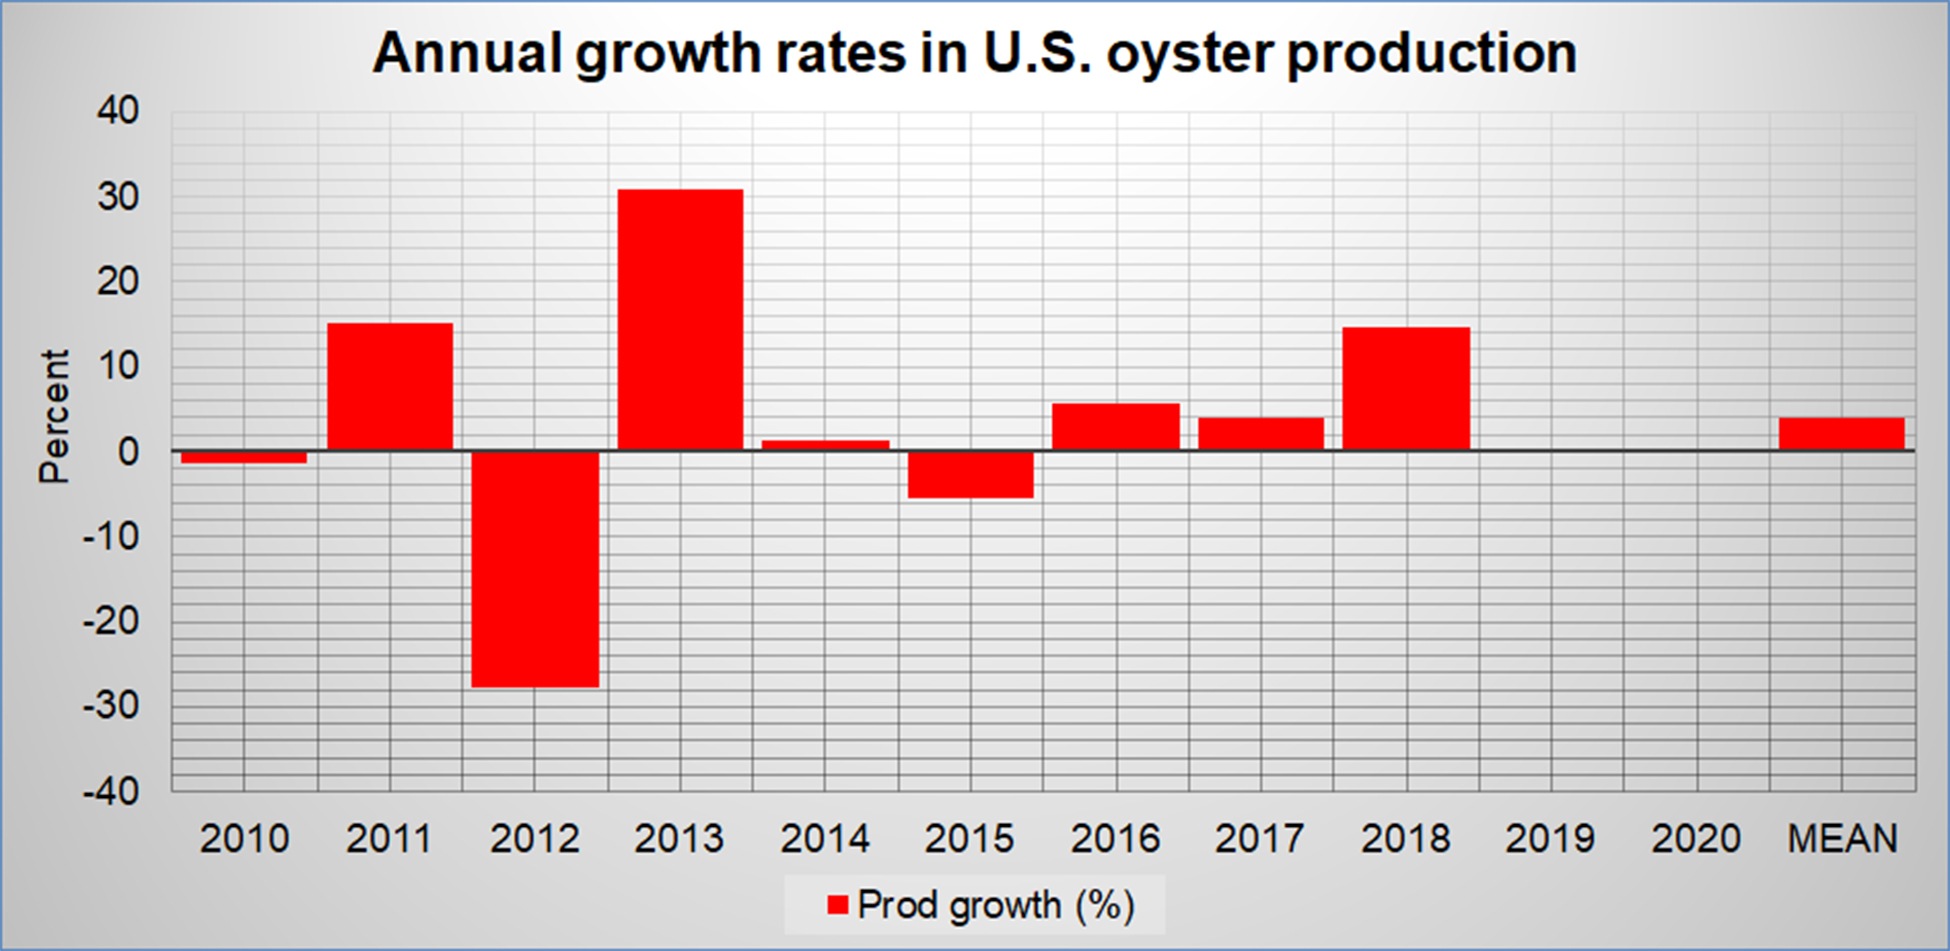 Oyster production growth